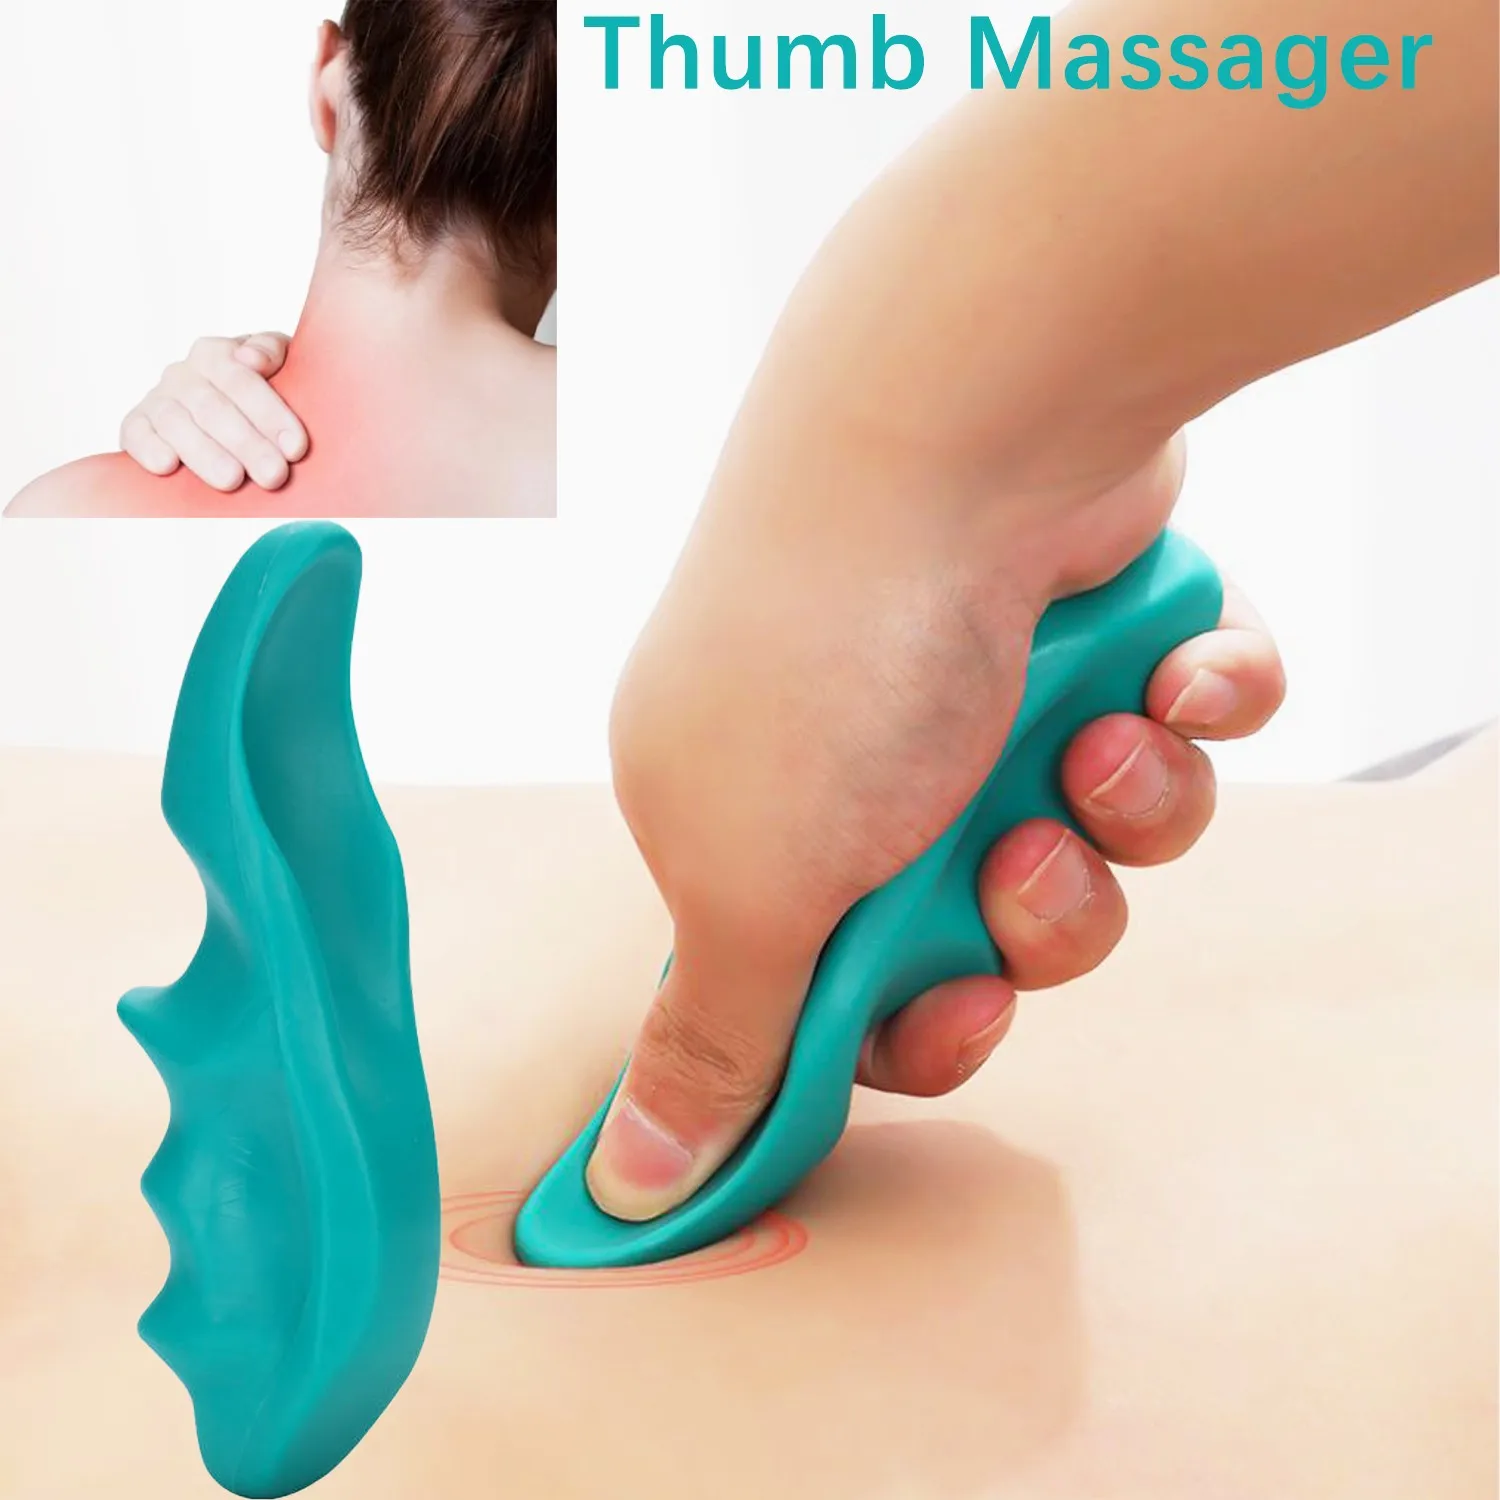 Manual Thumb Massager for Massage Body Acupressure Point Massage Pain Relief Neck Back Tool Health Care